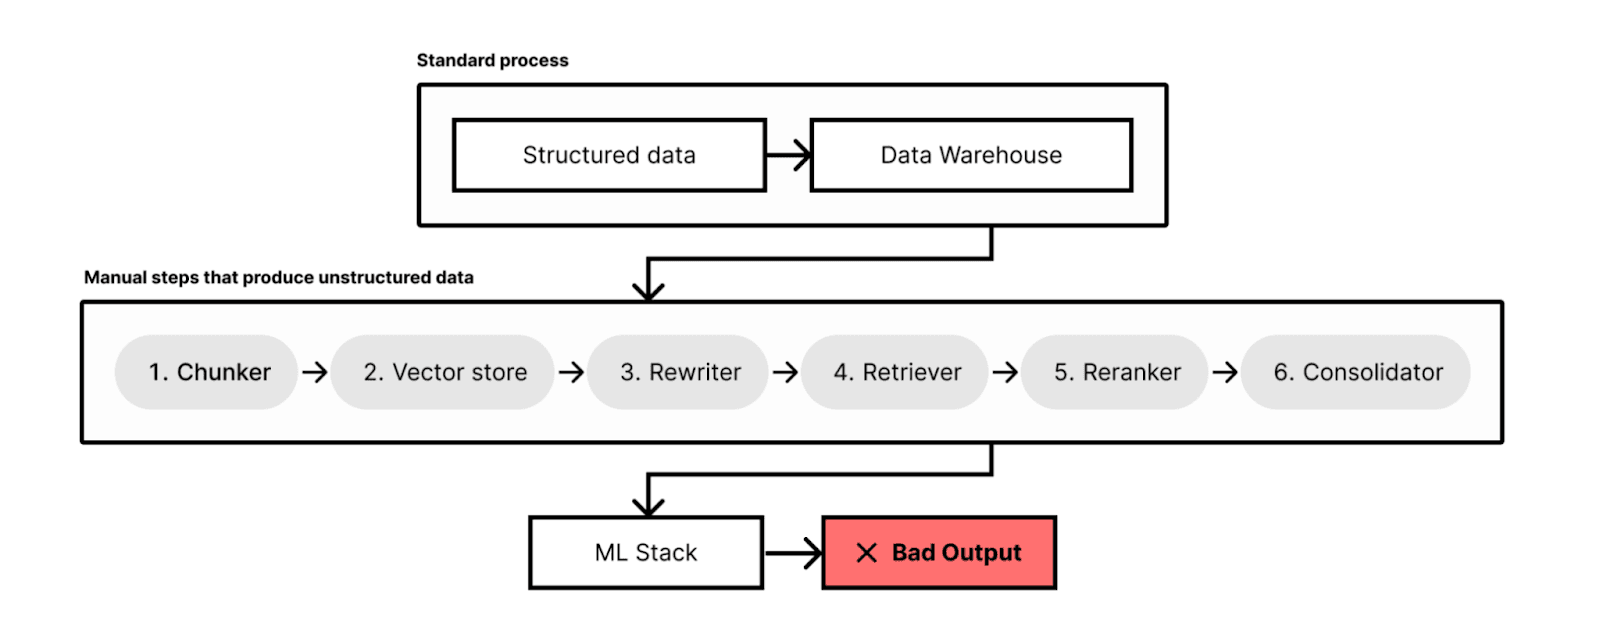 An example of a typical RAG system